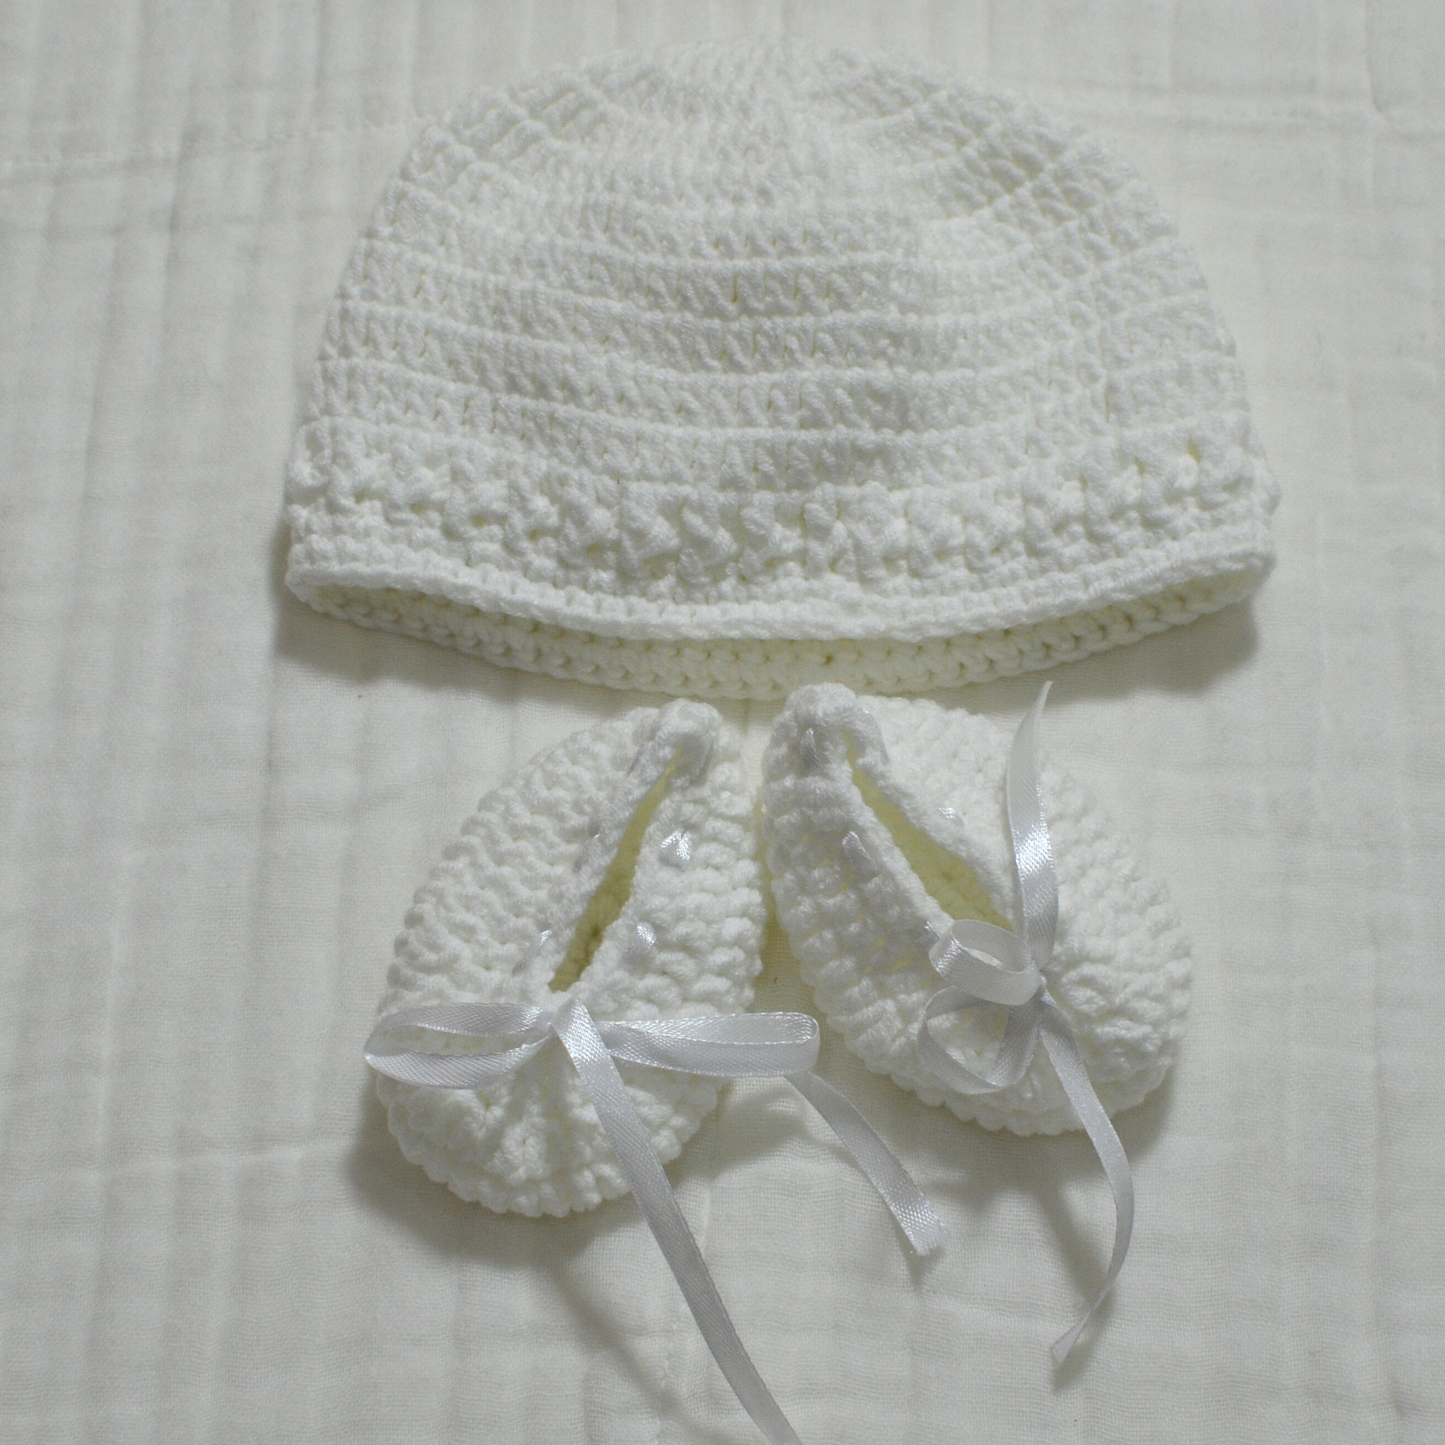 Crochet / Knitted Baby Hat and Socks Set 0 to 3 month